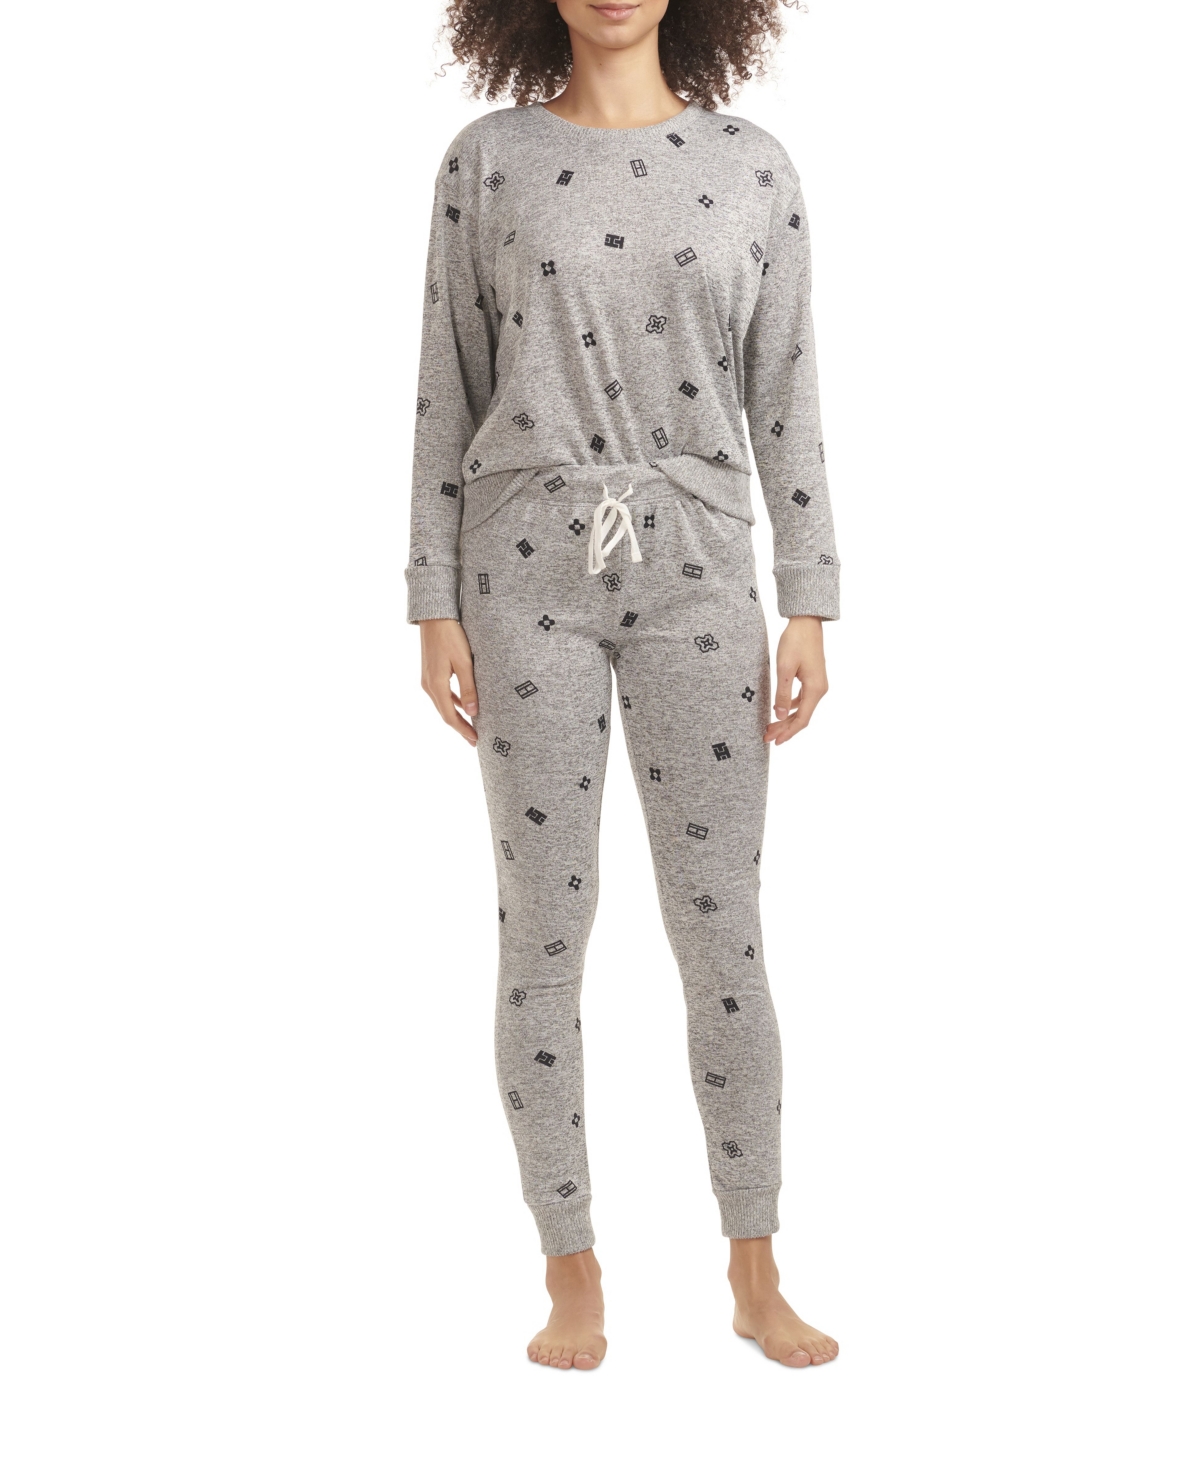 Tommy Hilfiger Women's Hacci Printed Pajama Pullover Pant Set